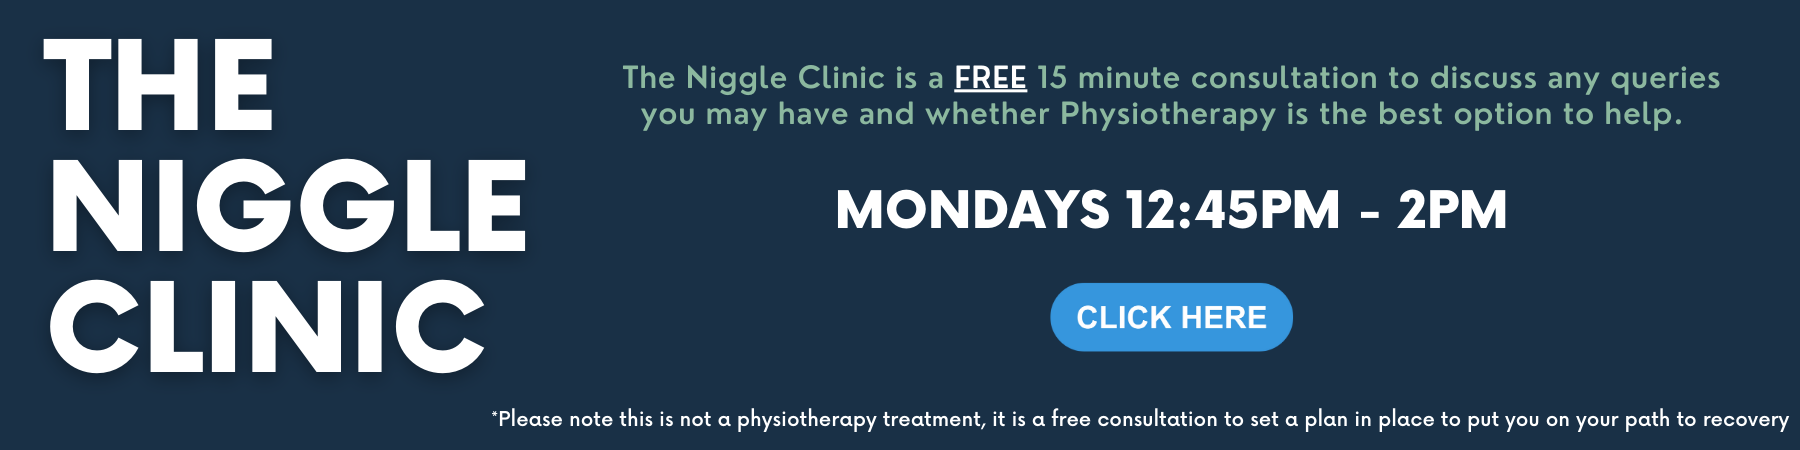 the niggle clinic